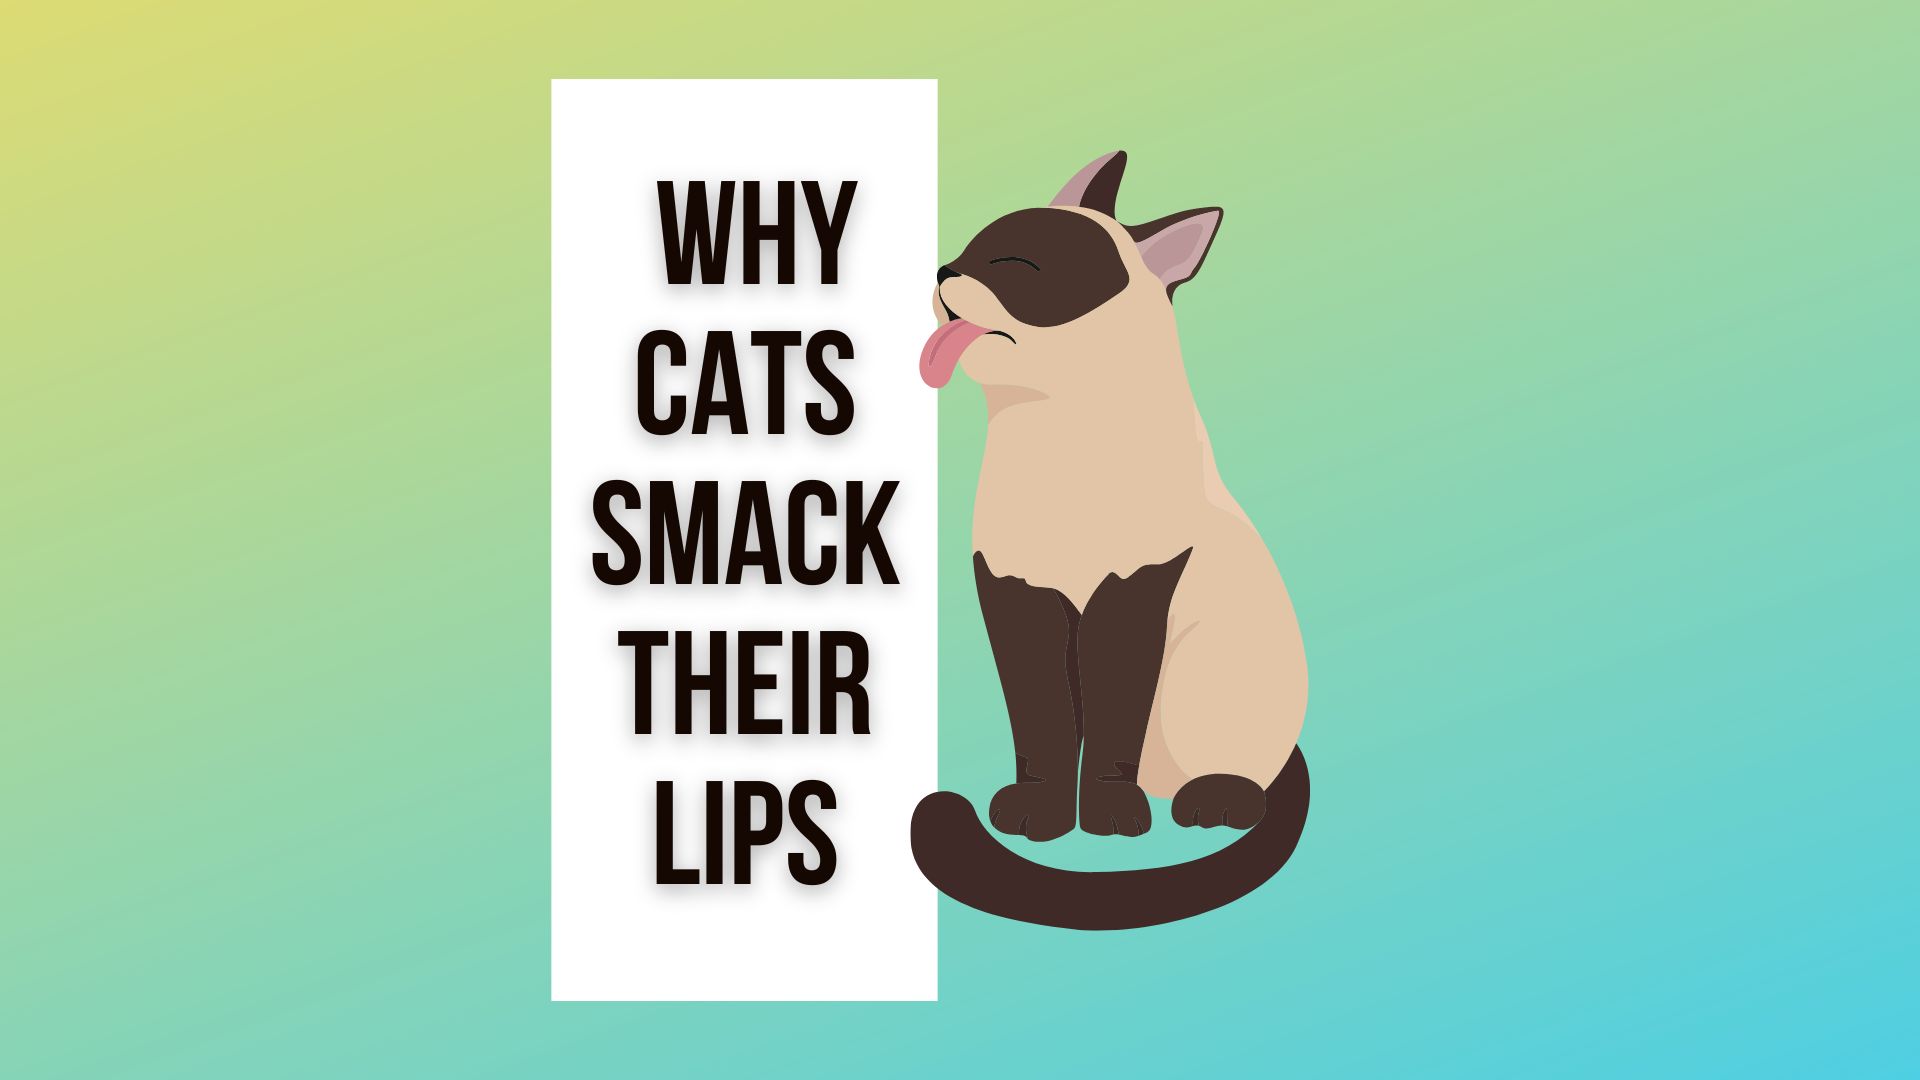 Reasons Why Cats Smack Their Lips